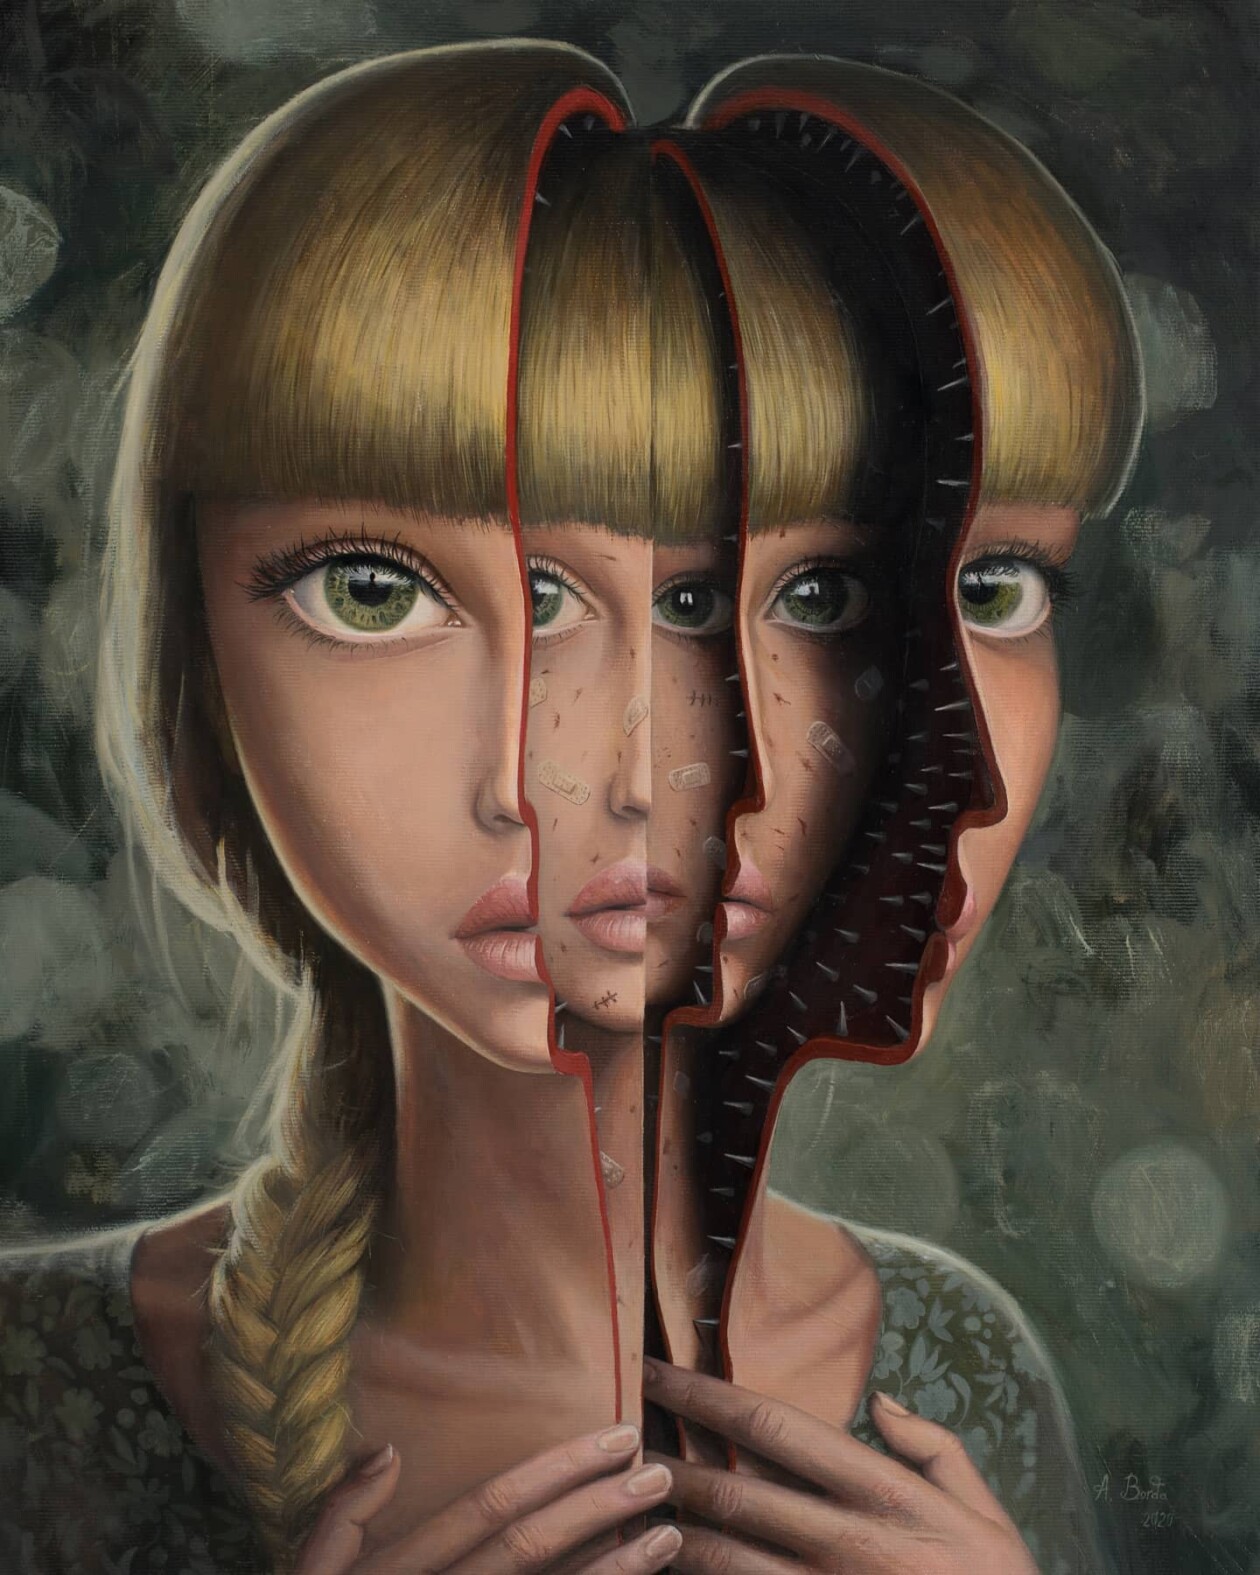 Mesmerizing And Thought Provoking Surreal Paintings By Adrian Borda (9)